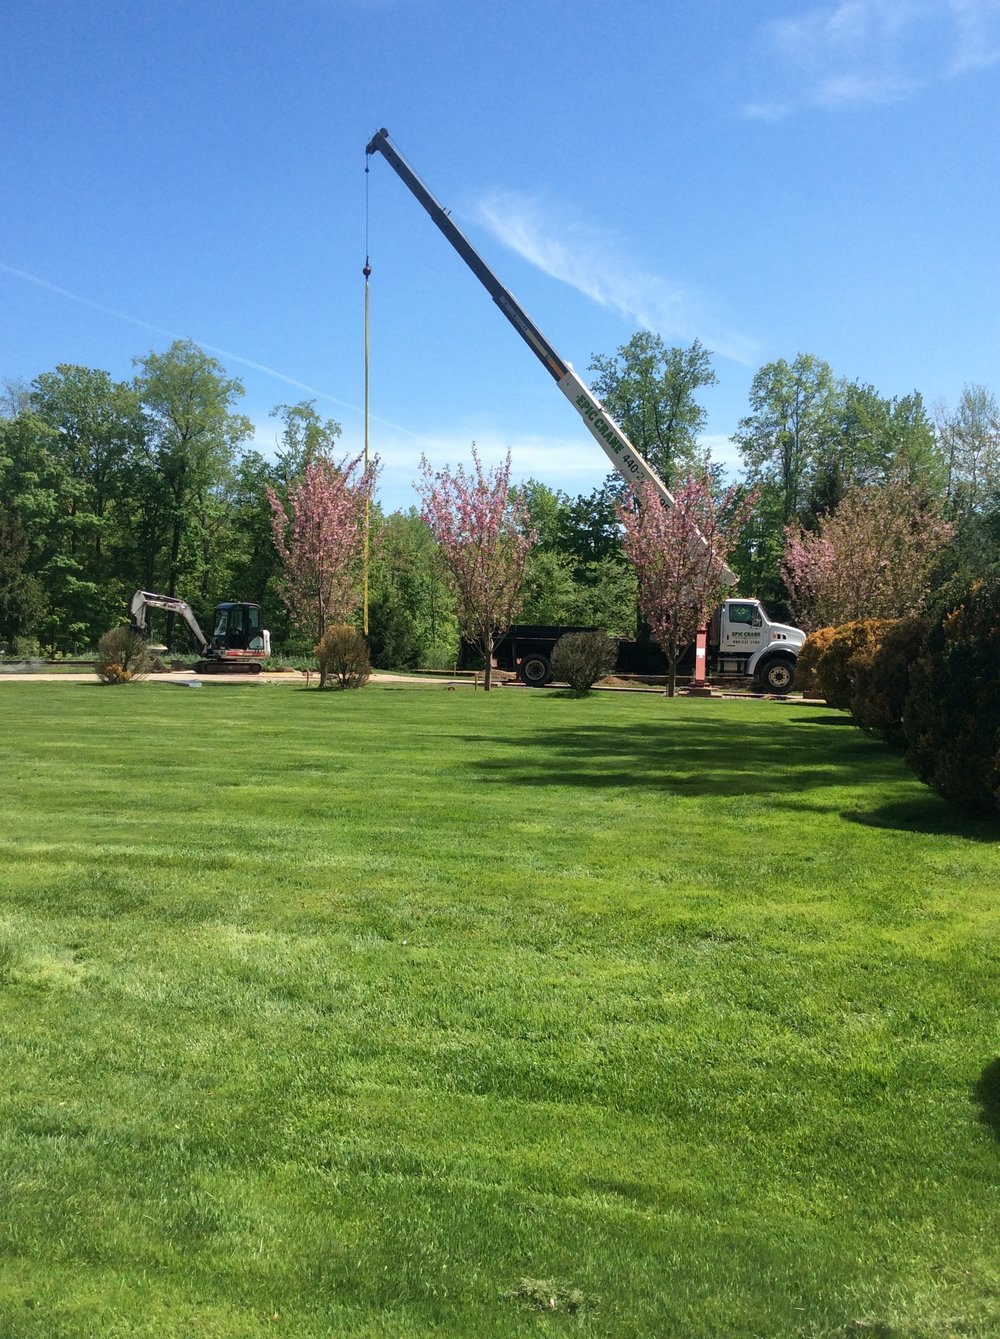 Top lawn care and snow removal in Chagrin Falls, OH